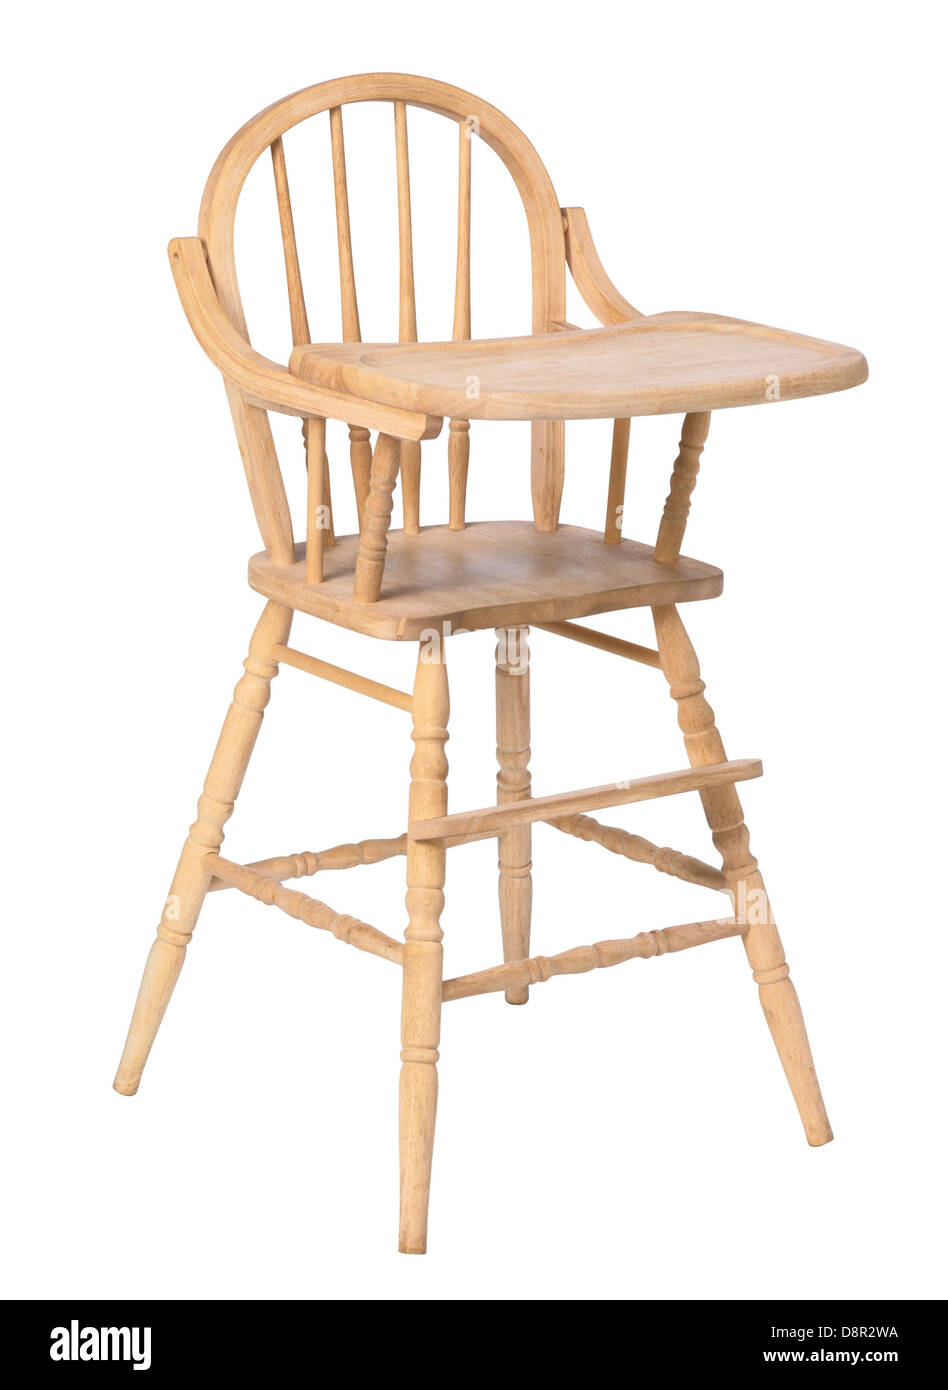 Chipped Wooden Highchair isolated (baby feeding chair ) Stock Photo